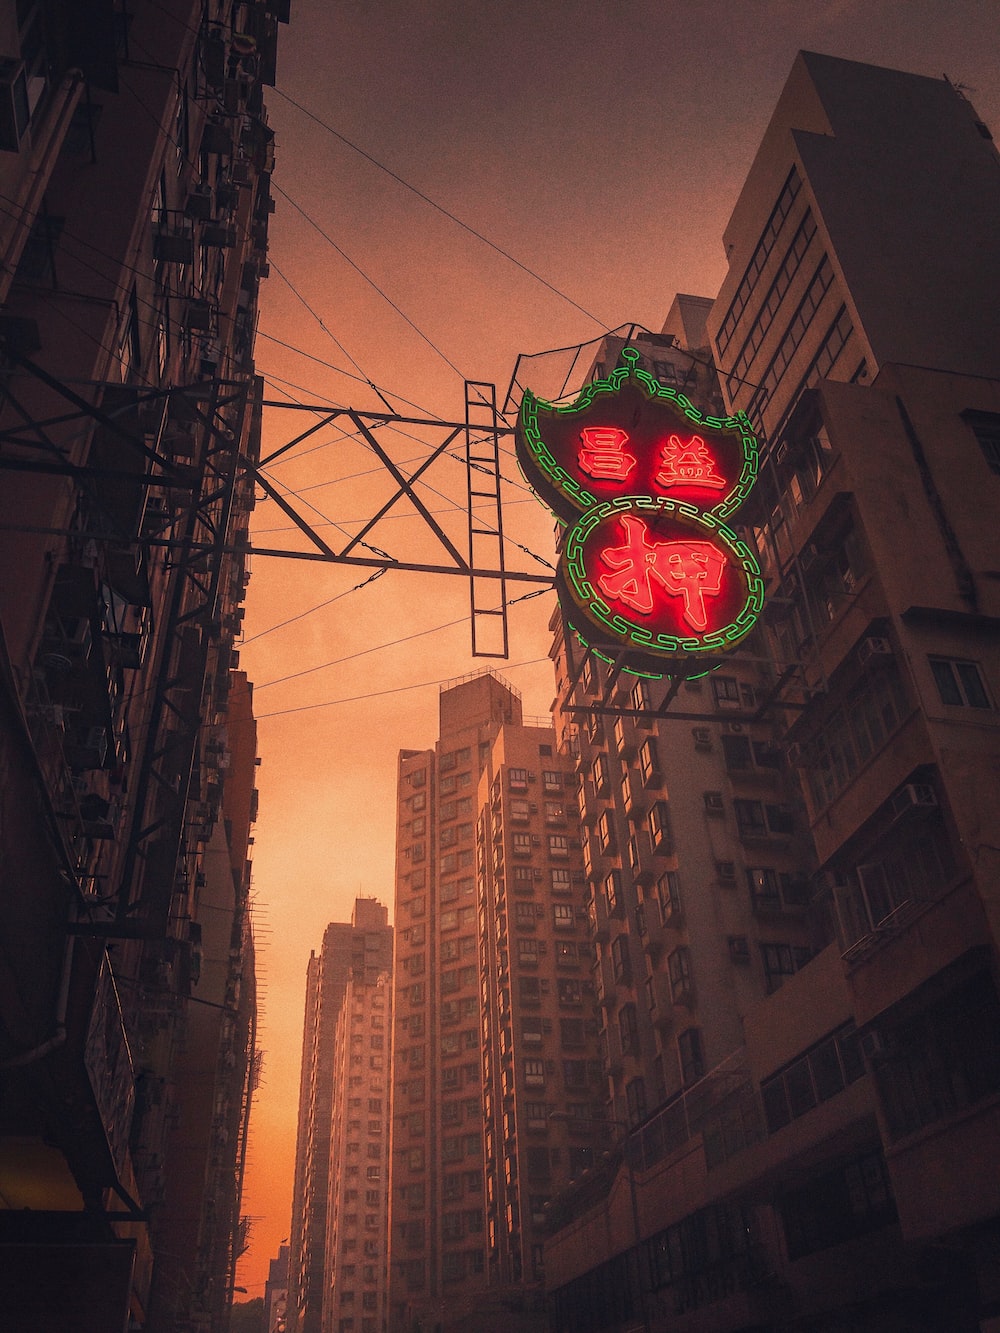 A neon sign for a Chinese restaurant in a city - Neon orange